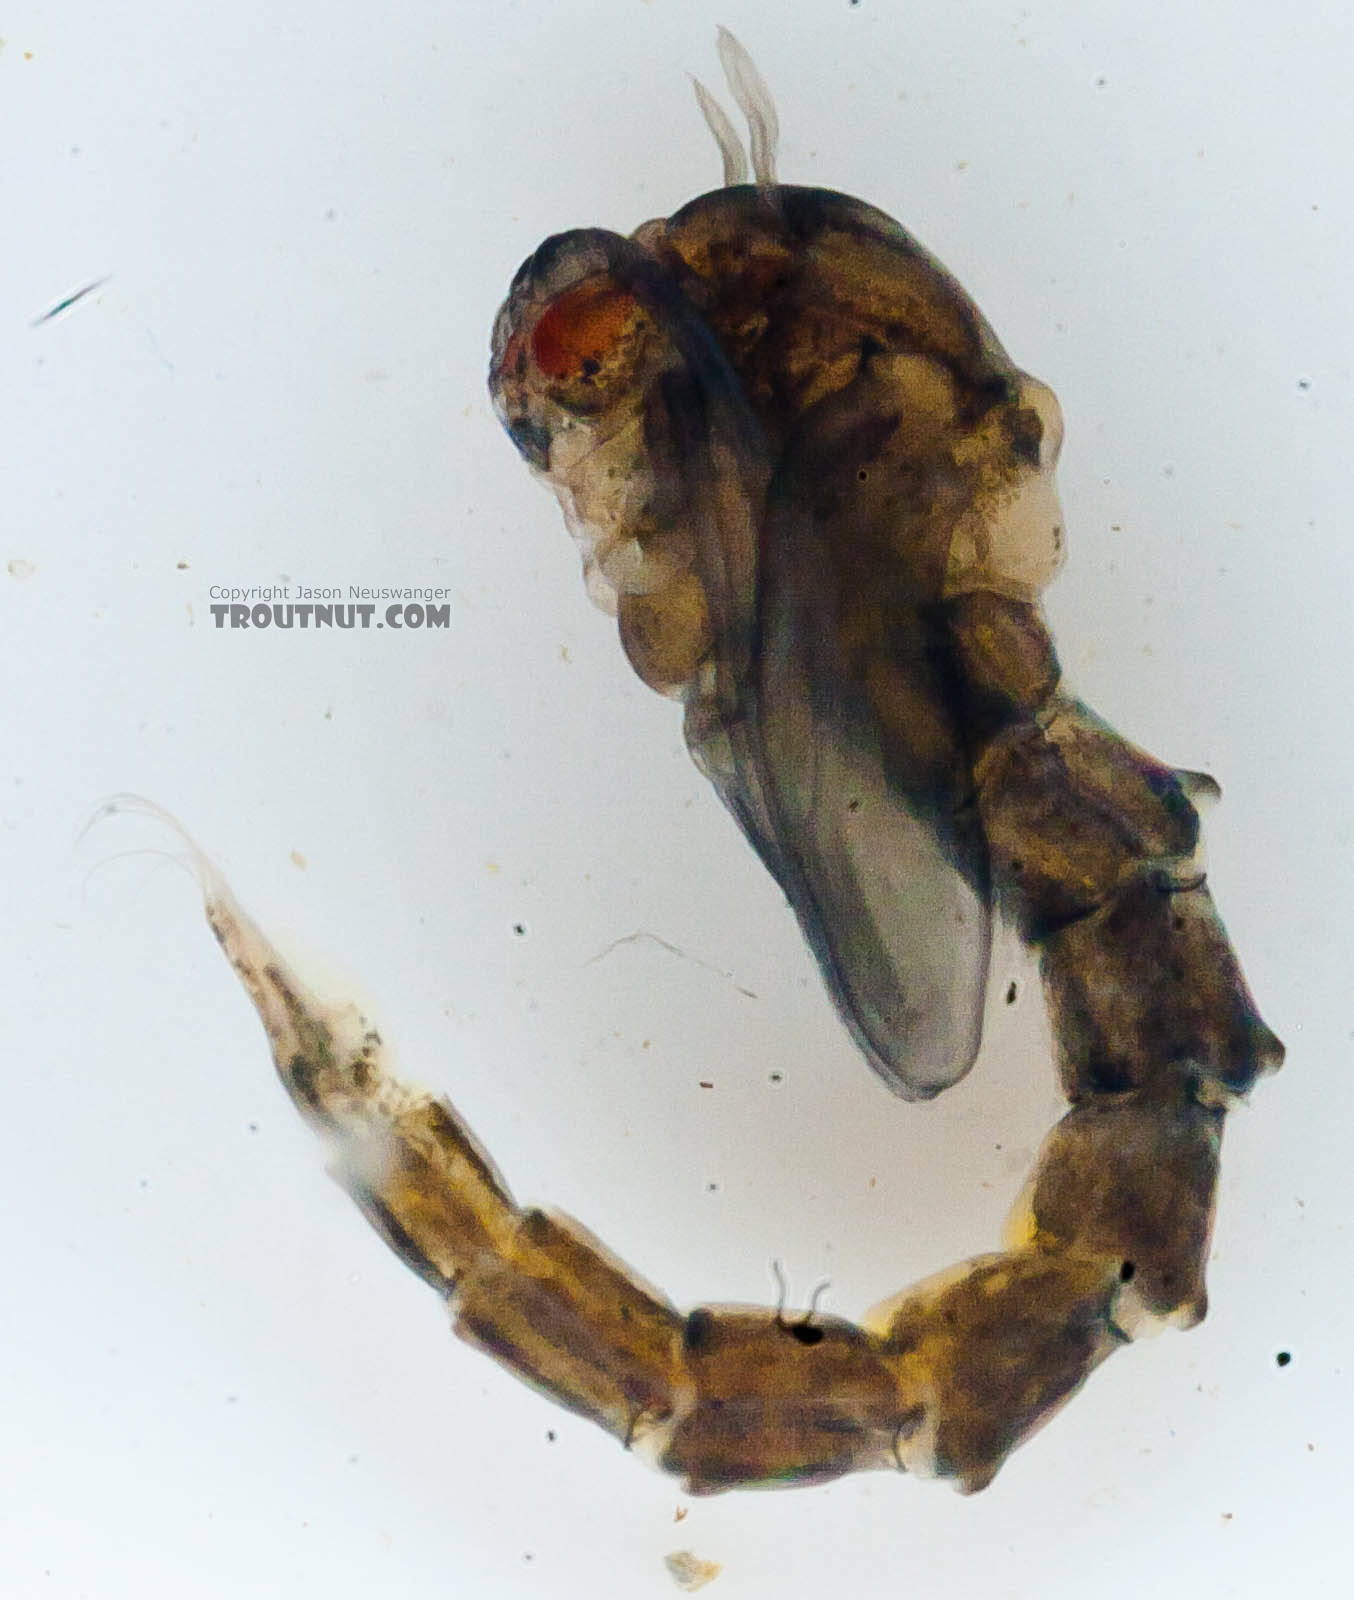 Culicidae (Mosquitoes) Mosquito Pupa from the Chena River in Alaska